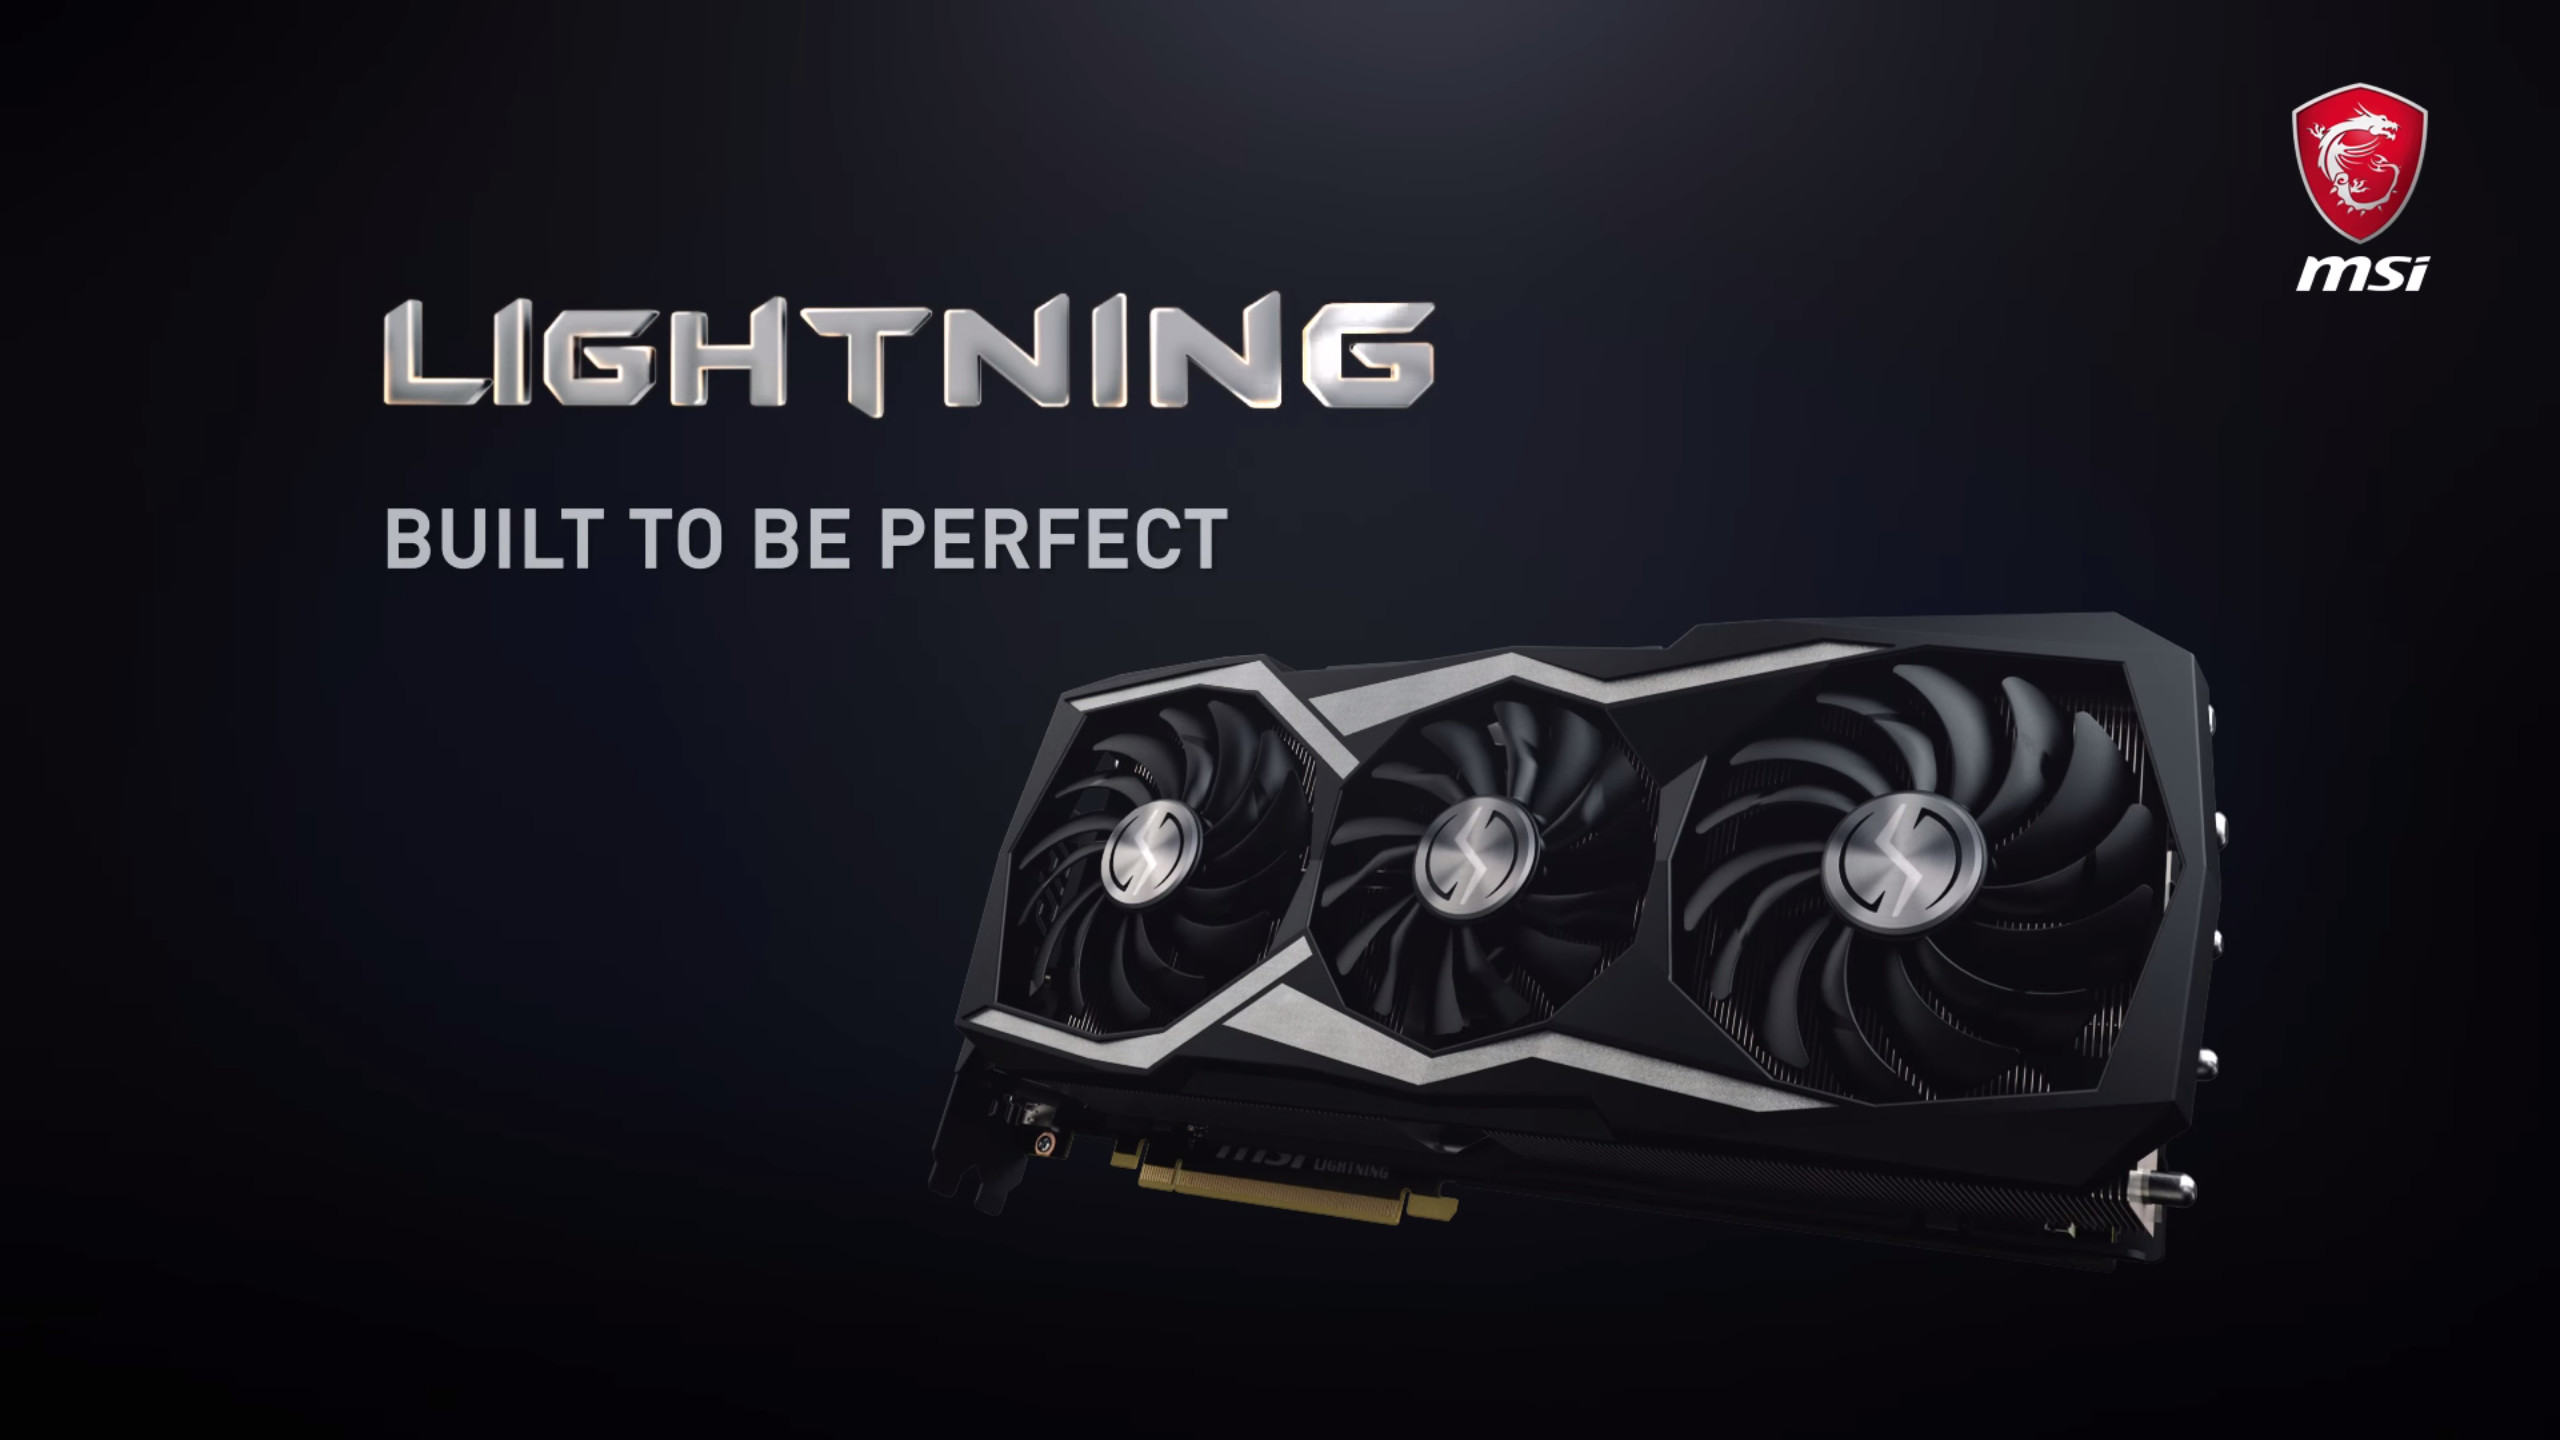 2560x1440 MSI Unleashes The GeForce GTX 1080 Ti Lightning Z Graphics Card – Features  Tri-Frozr Heatsink, Extreme Clocks and Beefy PCB